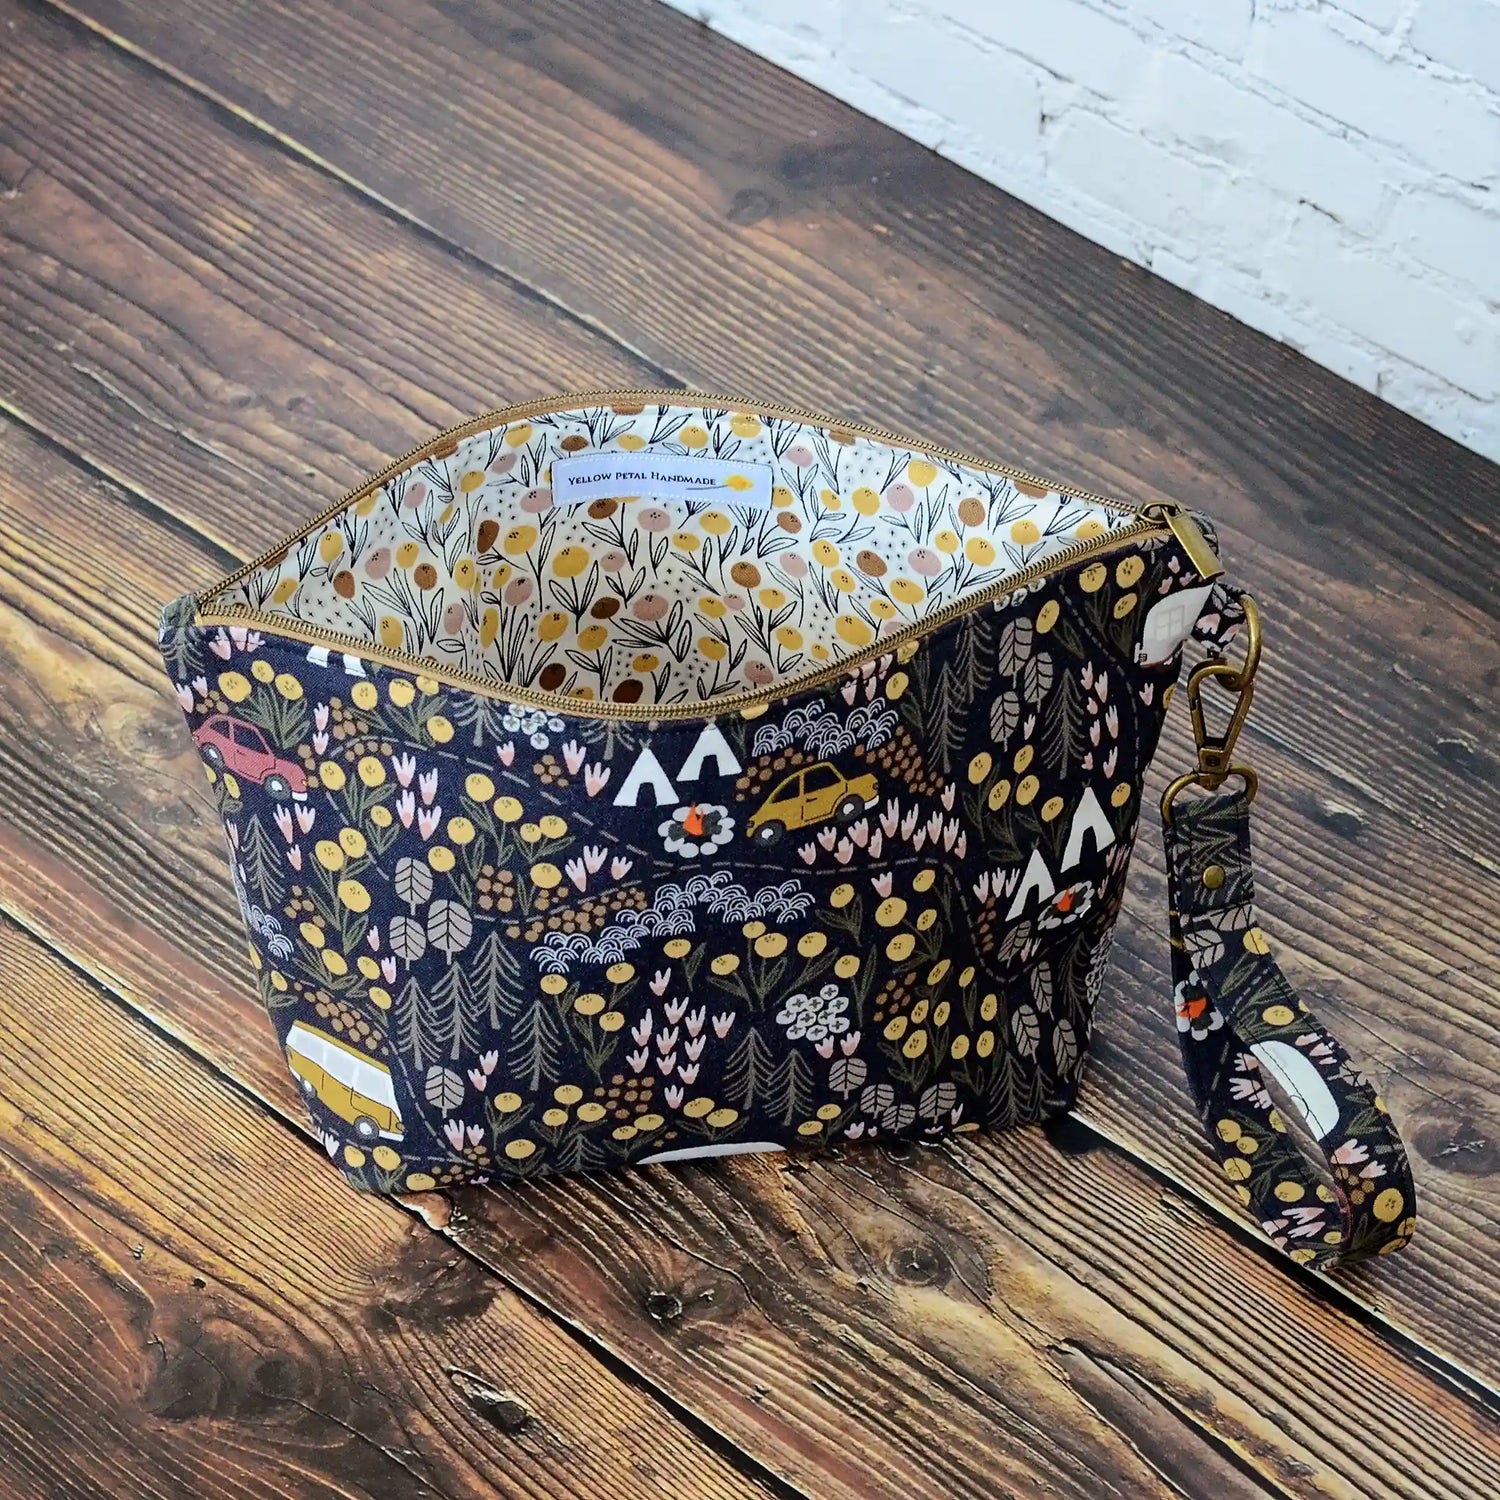 Small zippered project bag in camping fabric.  Made in Canada by Yellow Petal Handmade.